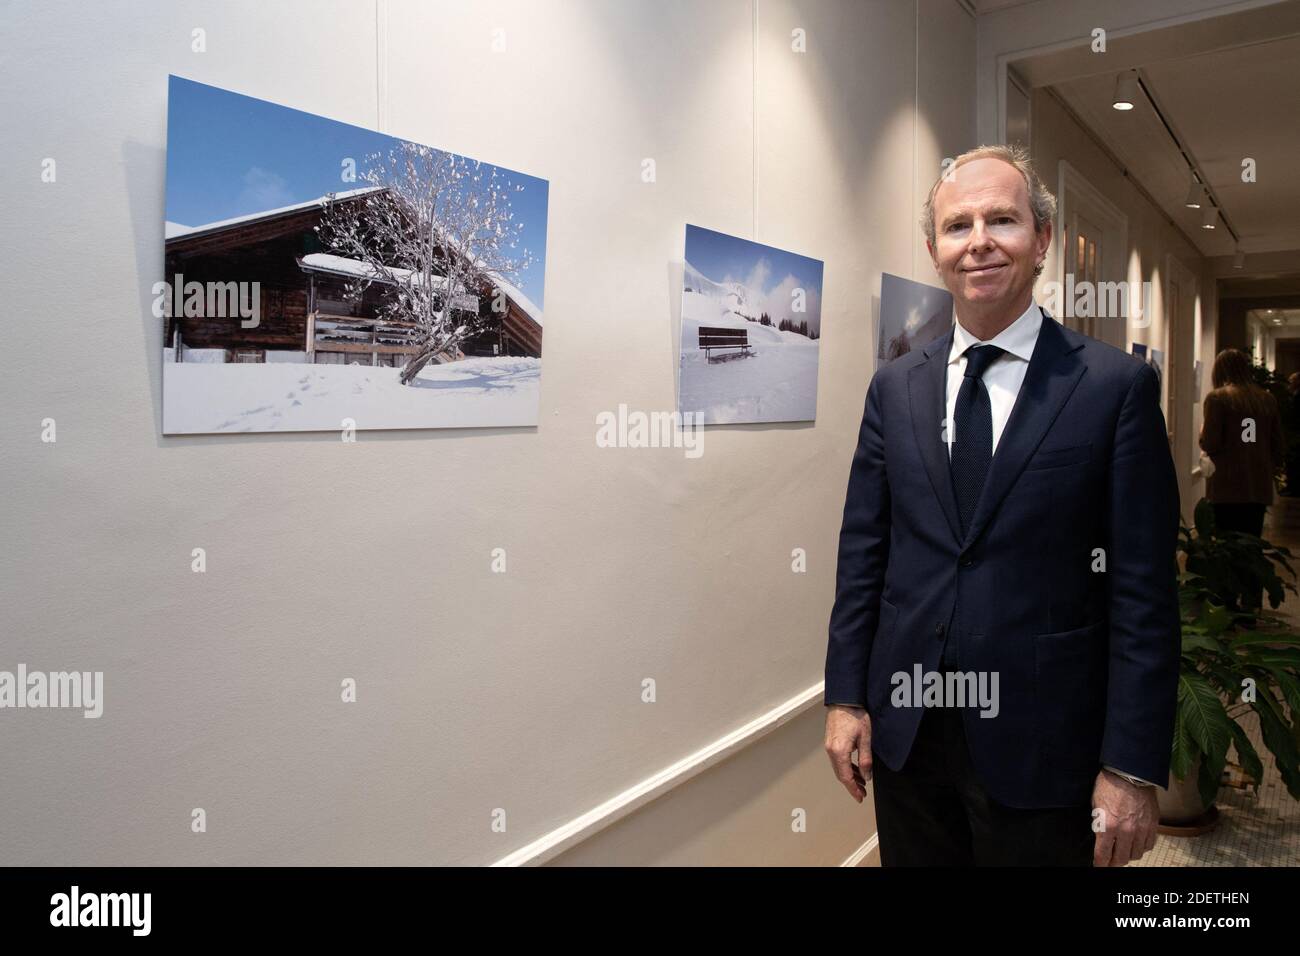 Inauguration of the 'Planete' exhibition of Prince Michel of Yugoslavia at the Biermans-Lapotre Foundation in collaboration with the Maison d'Italie Foundation on December 4, 2019, Paris, France. Photo by David Niviere/ABACAPRESS.COM Stock Photo